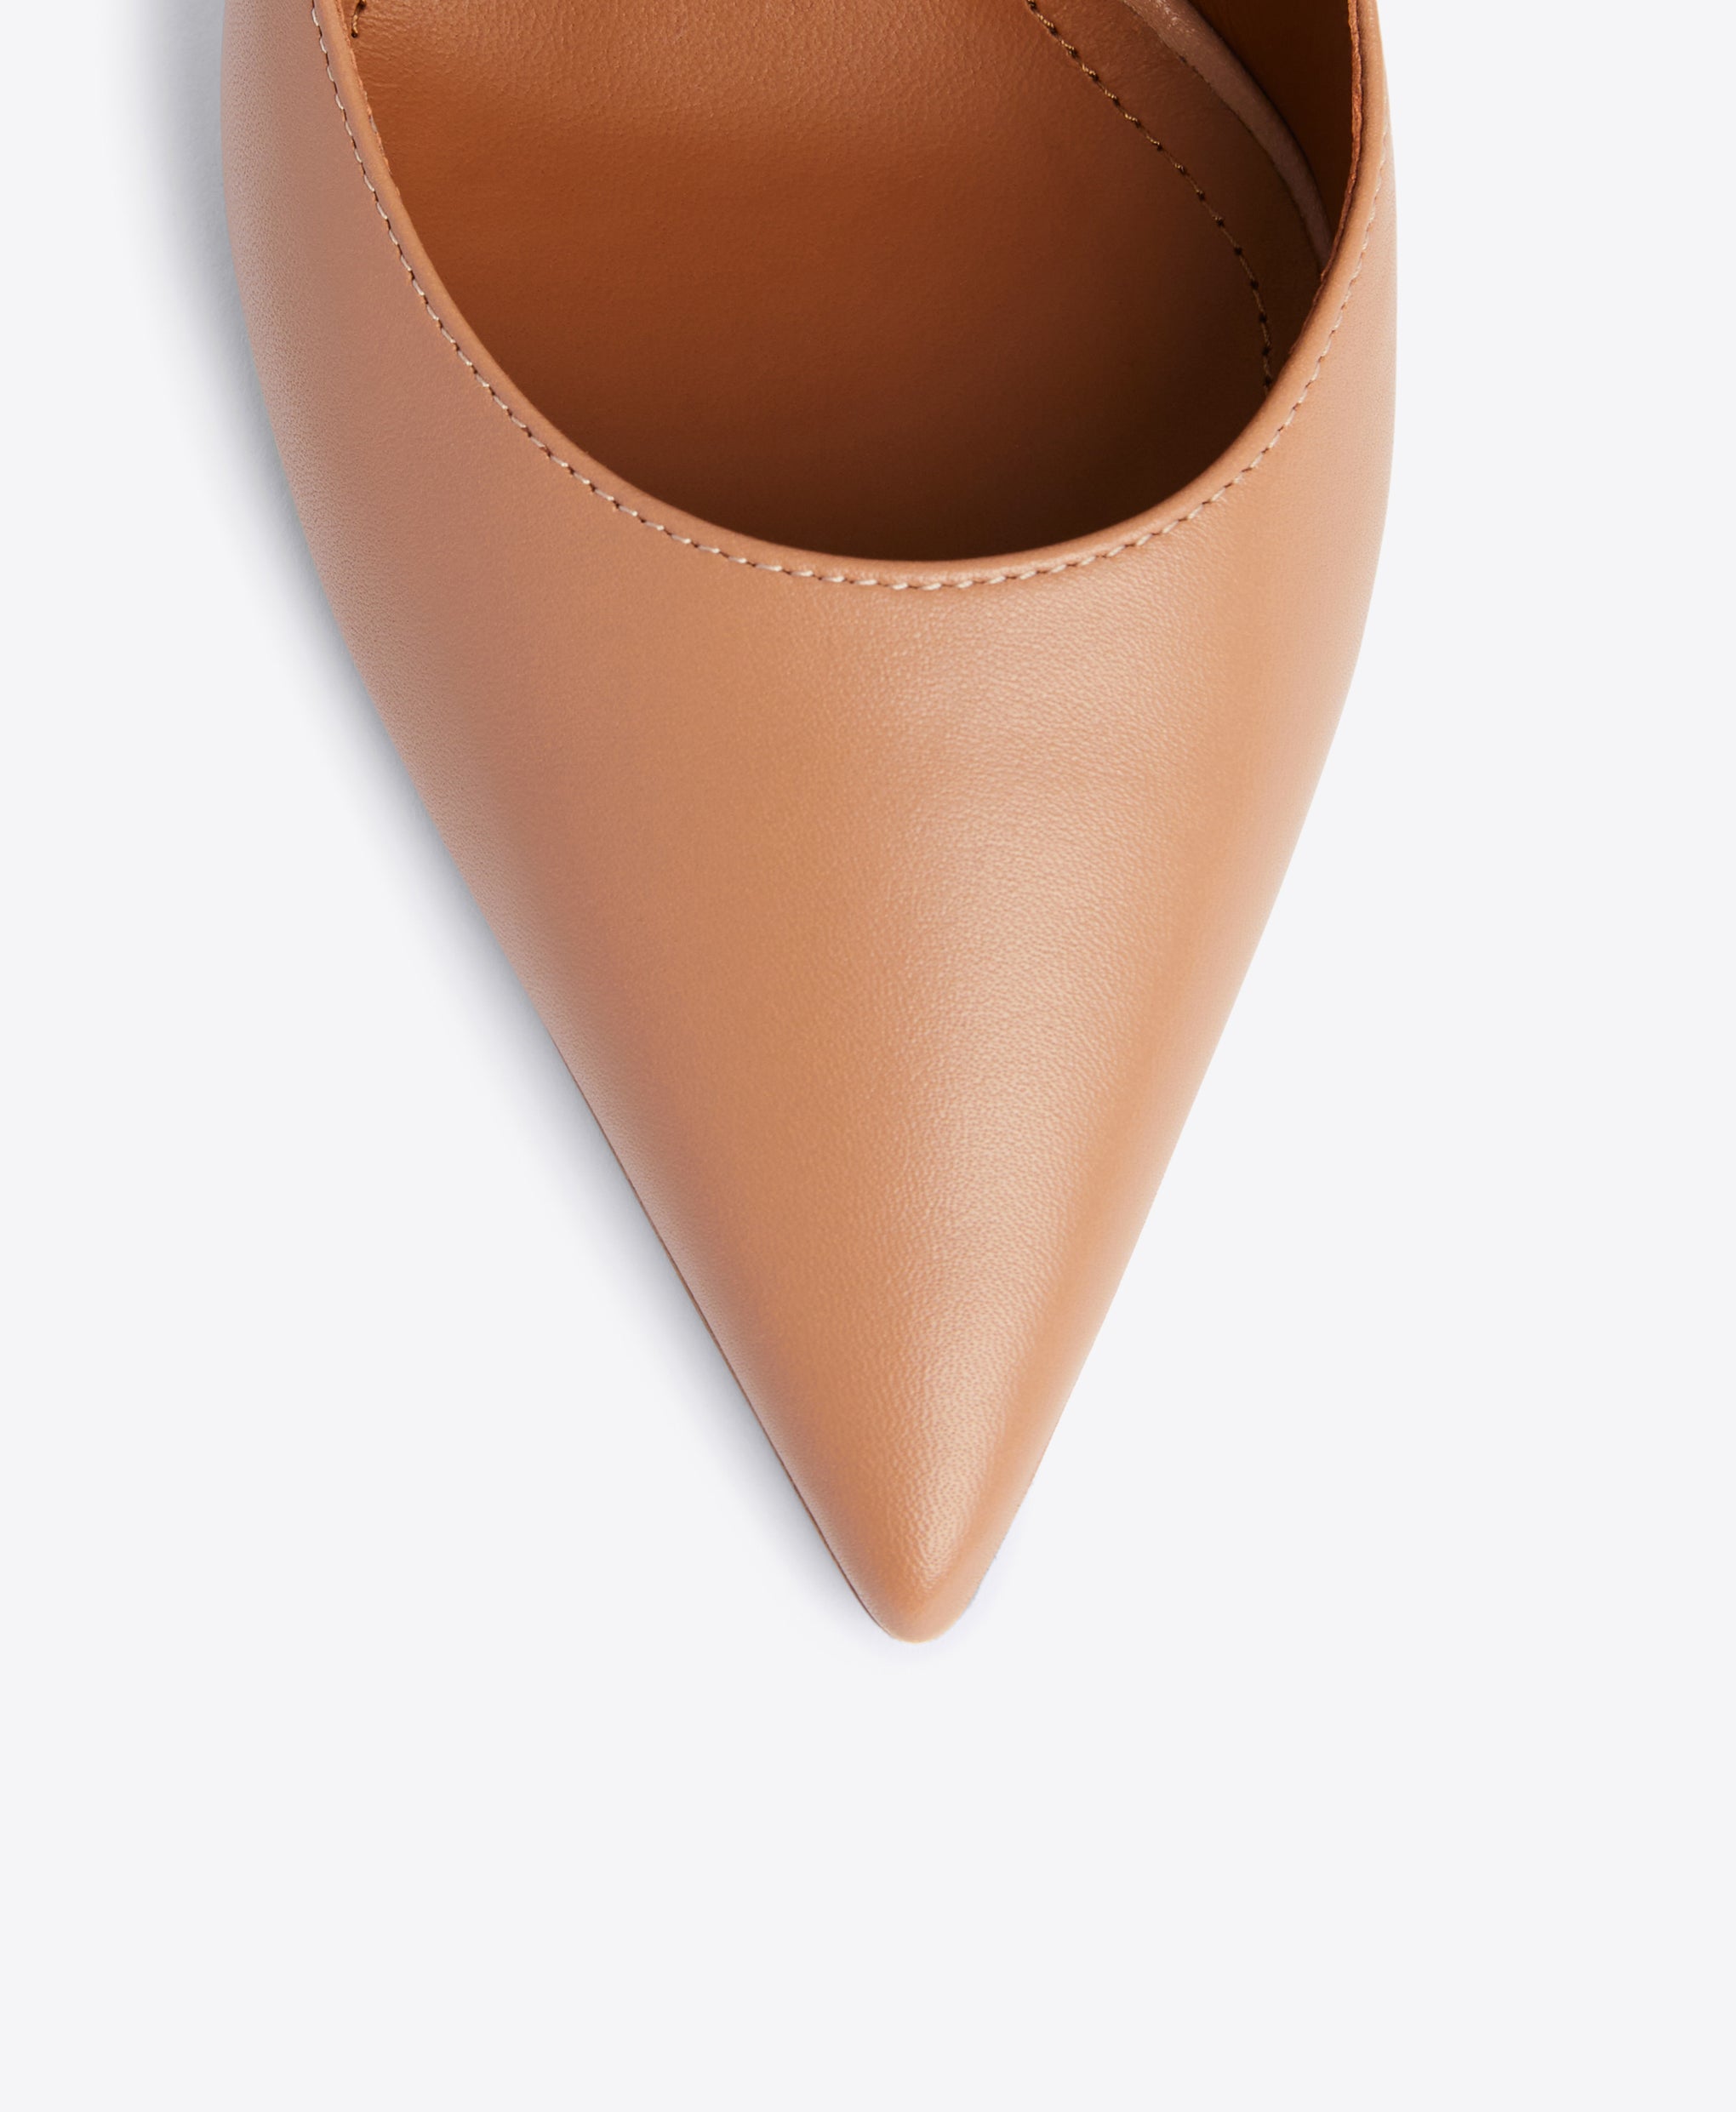 Sepia Nappa Lace-up Mules - Pointed Toe on Flared Stiletto | Malone Souliers